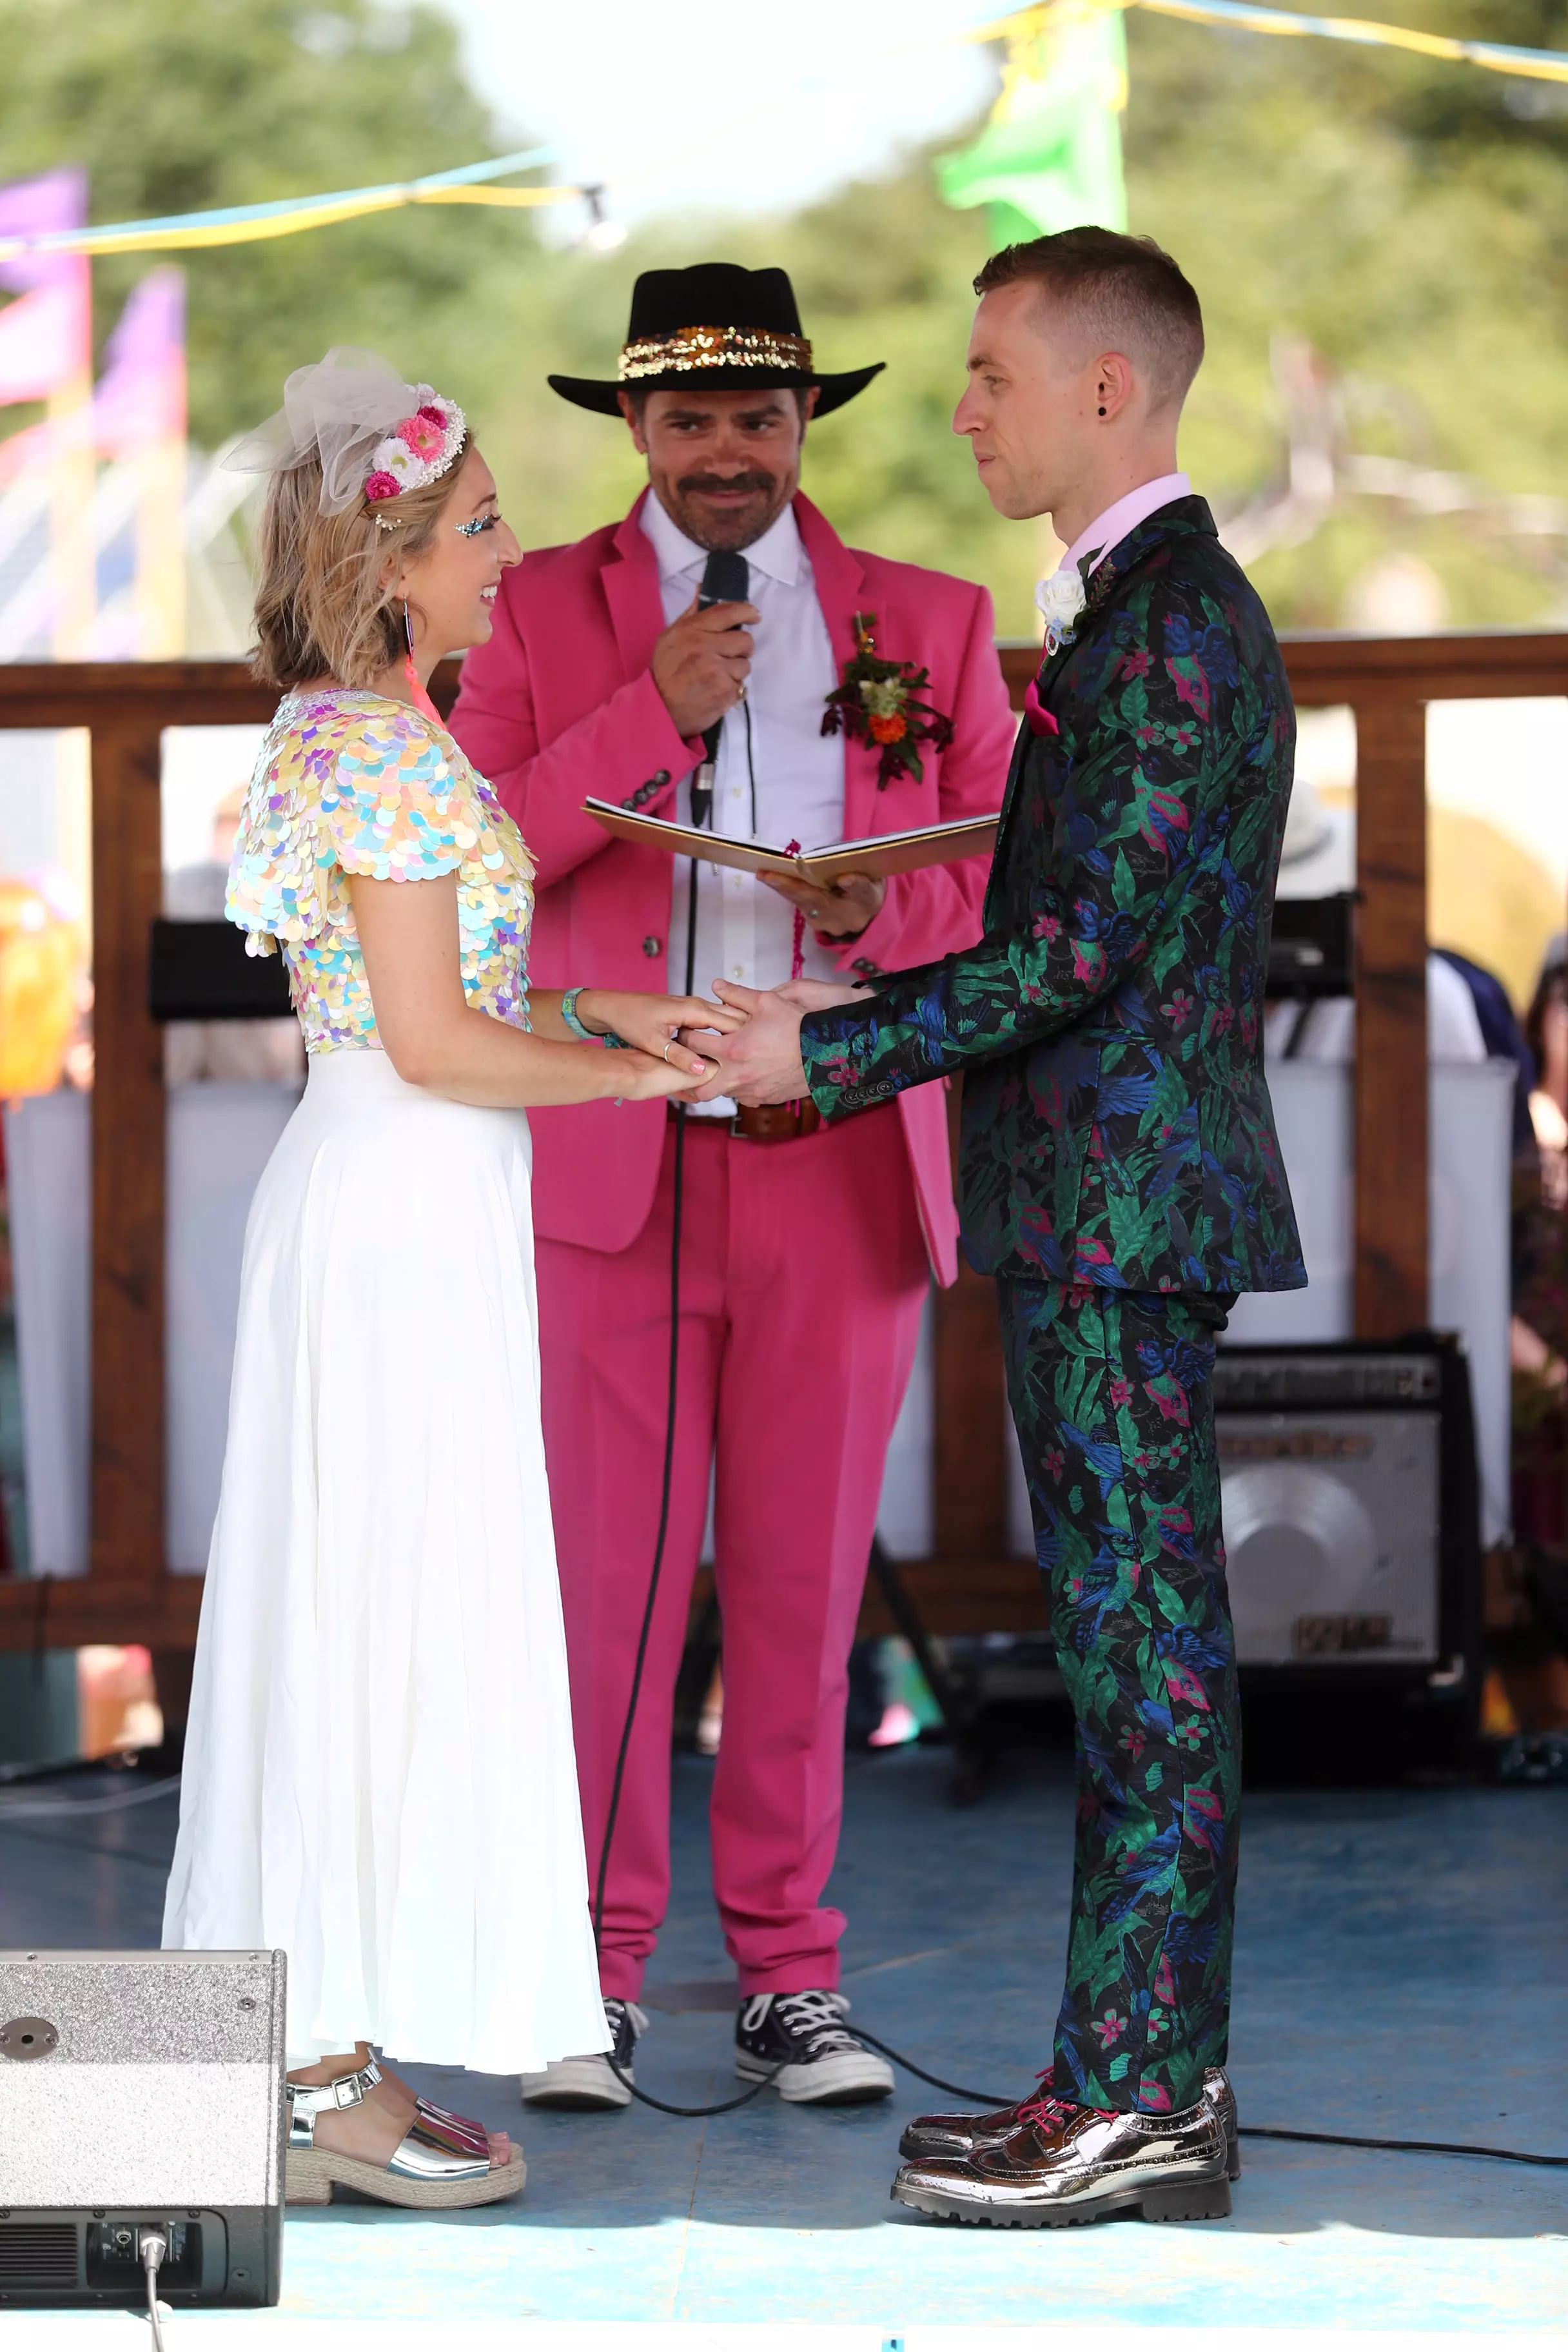 The pair wed in a colourful ceremony at Glasto.